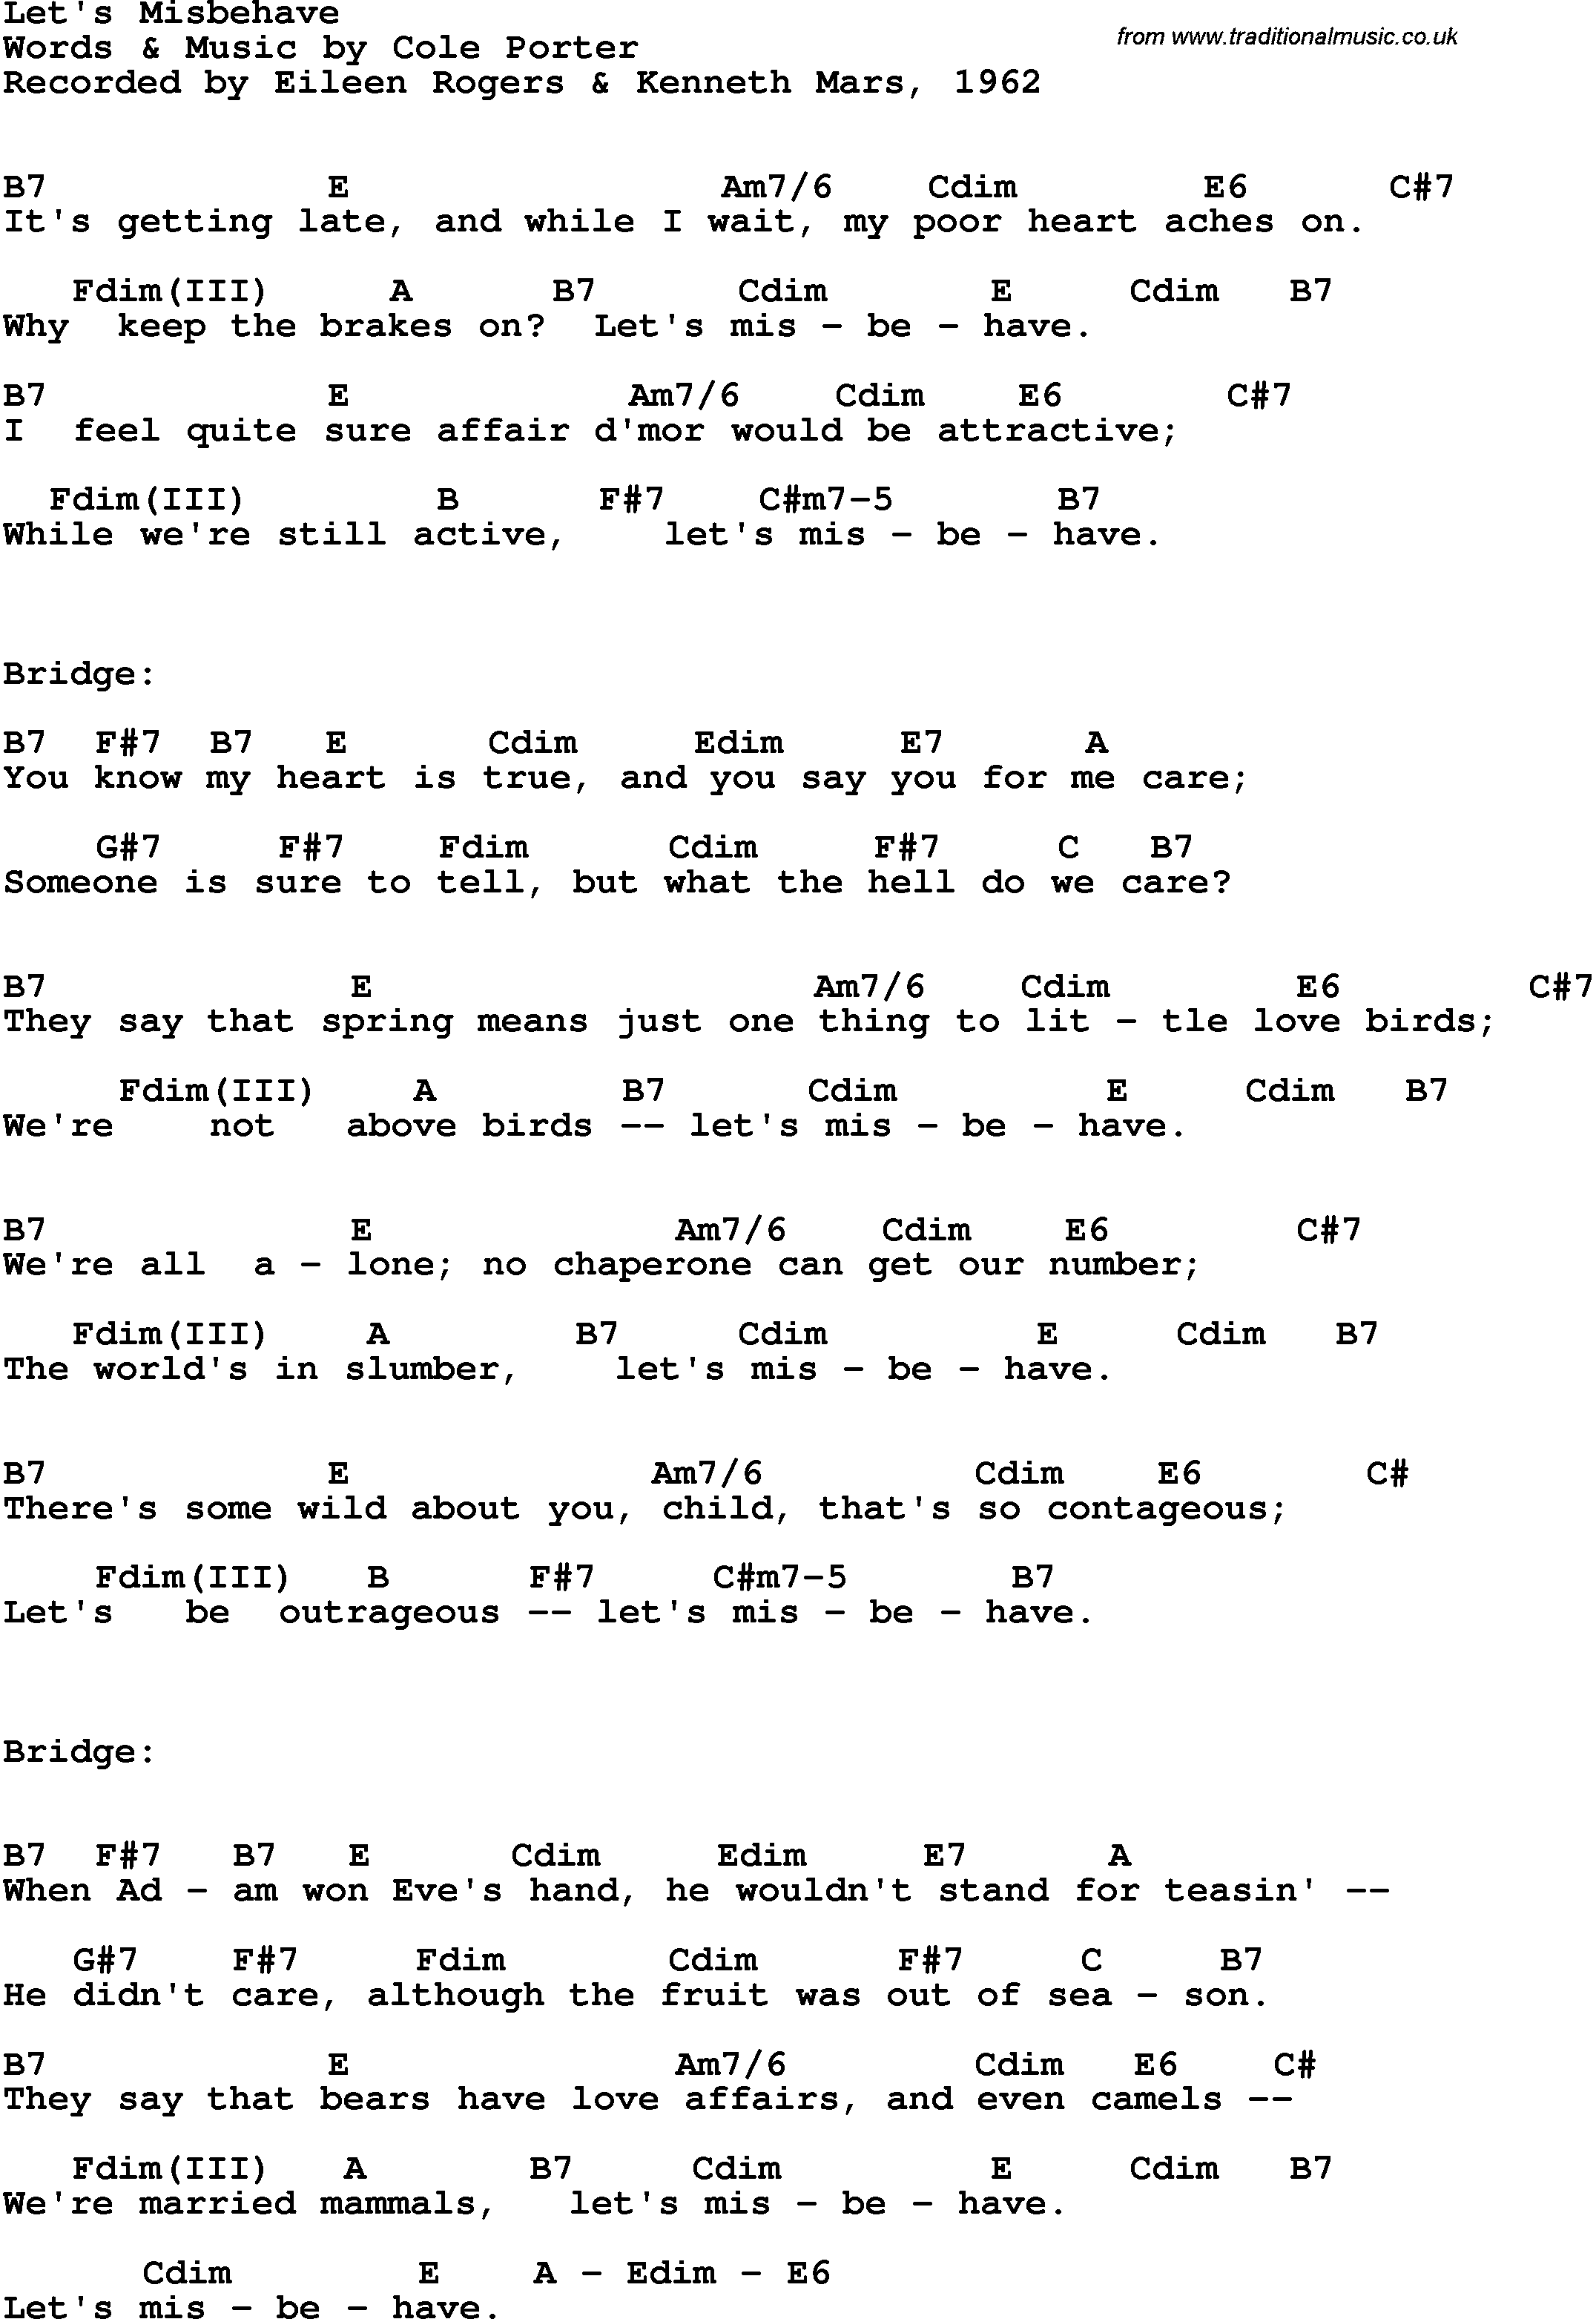 Song Lyrics with guitar chords for Let's Misbehave - Eileen Rogers & Kenneth Mars, 1962